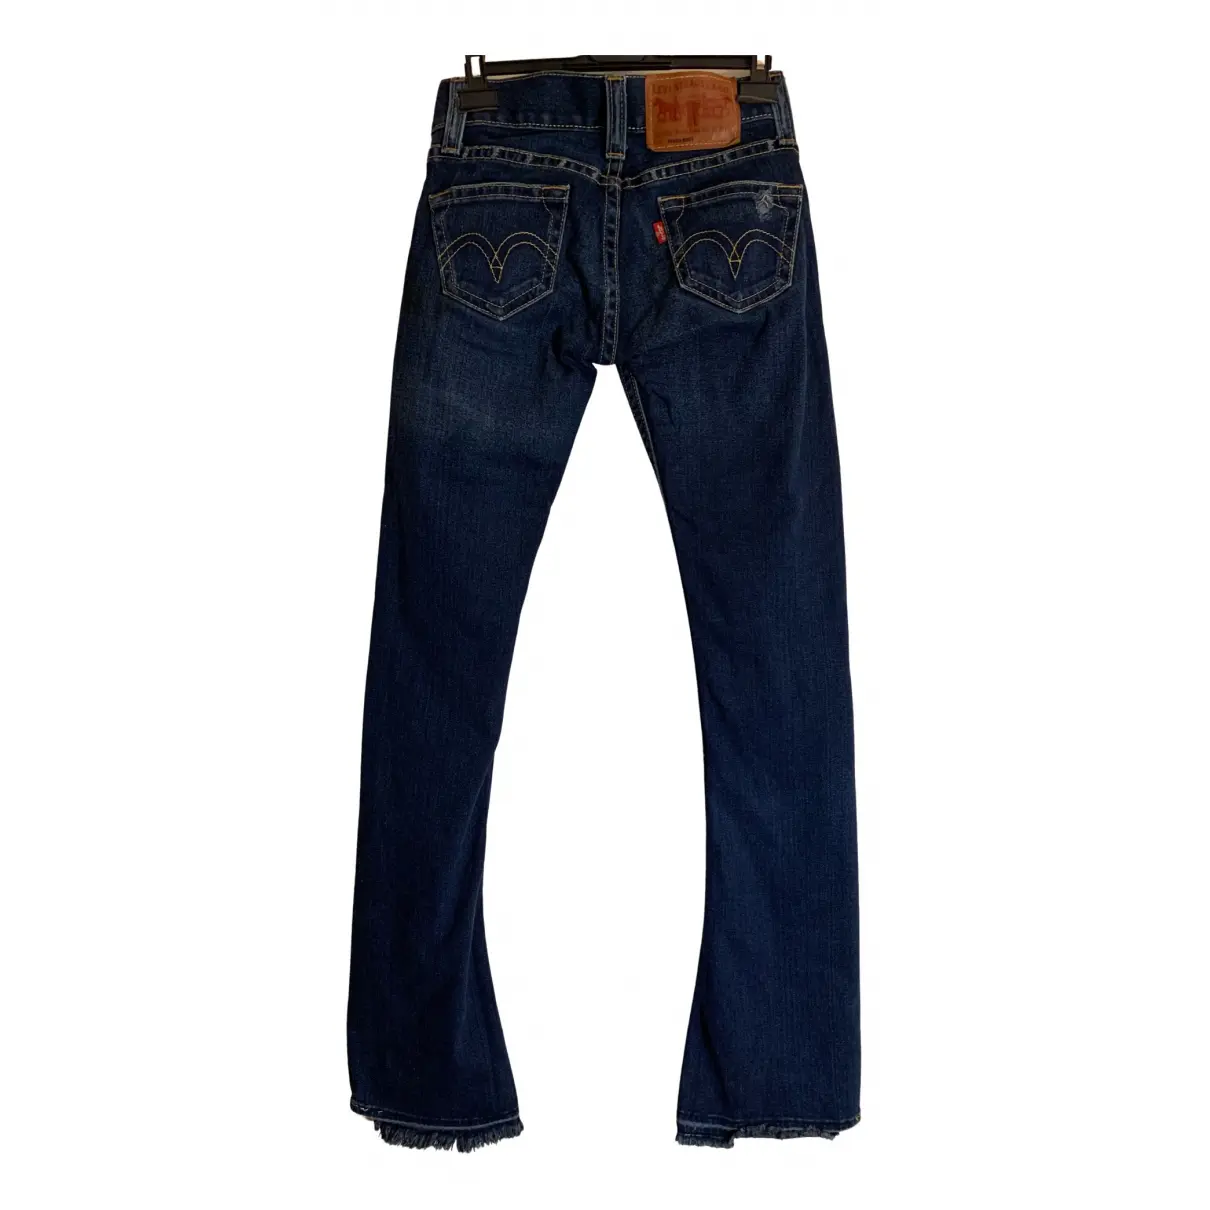 Buy Levi's Vintage Clothing Straight pants online